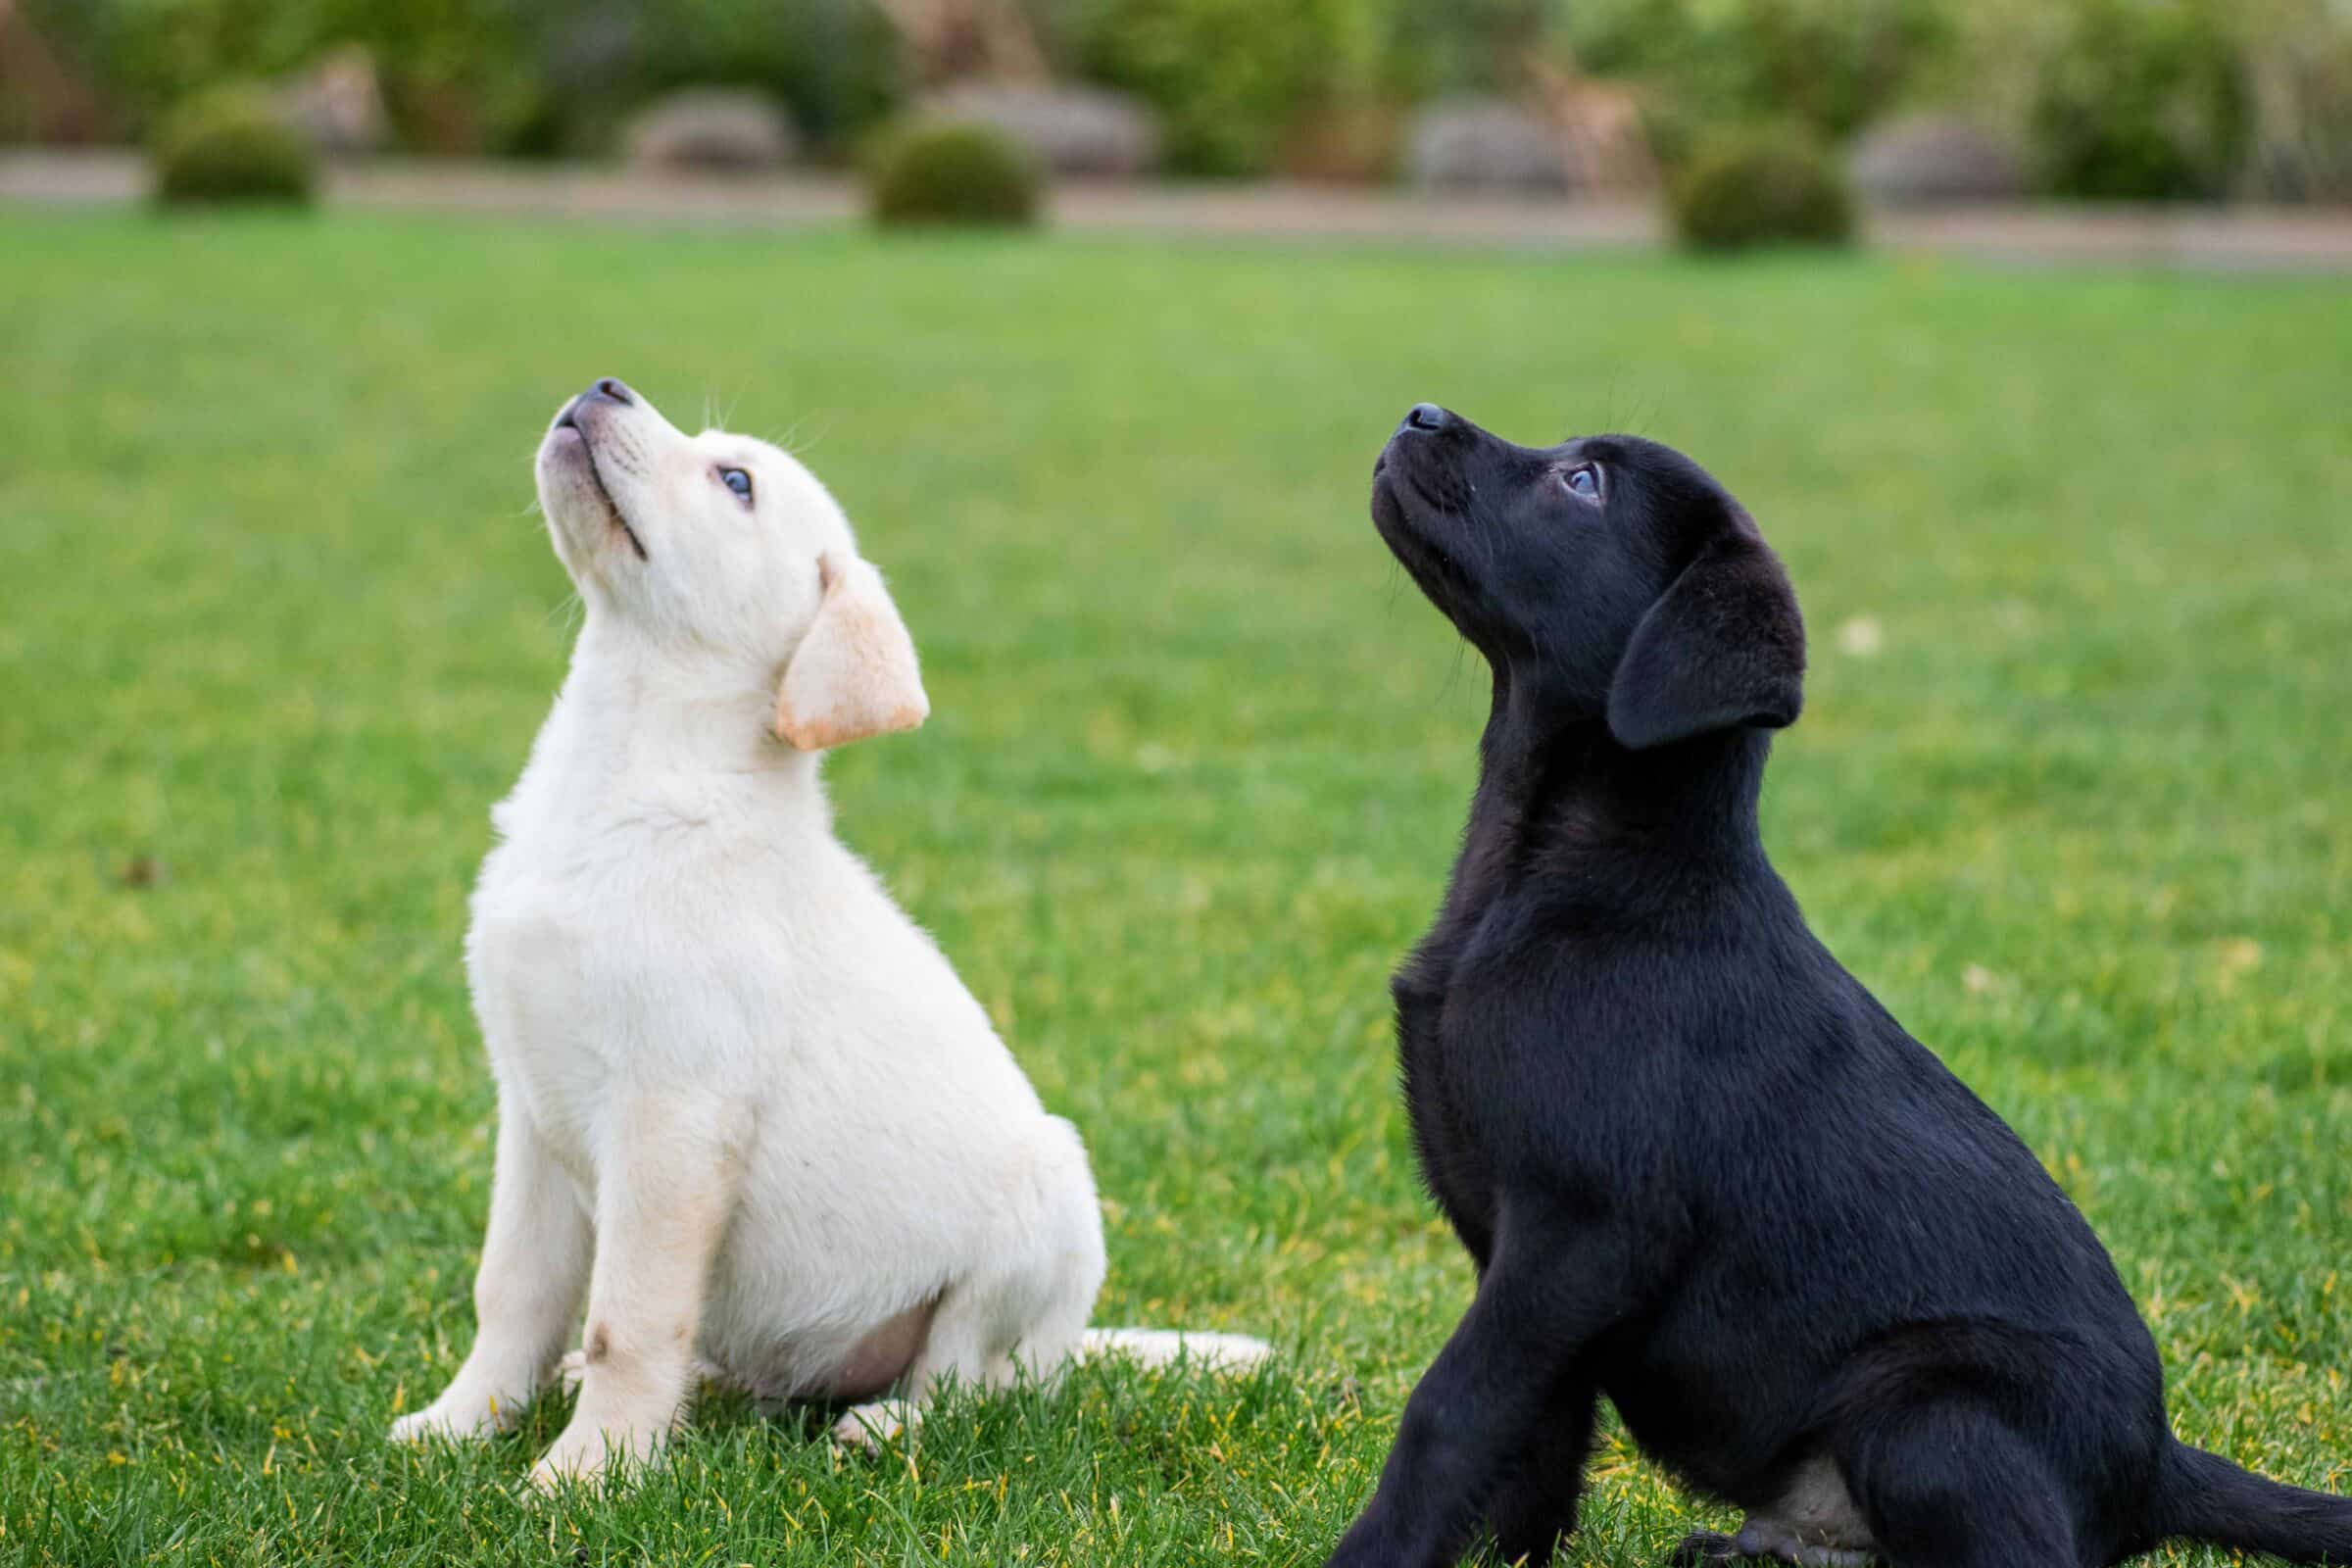 a yellow lab and black lab puppy both in training learning how to "sit" in green grass